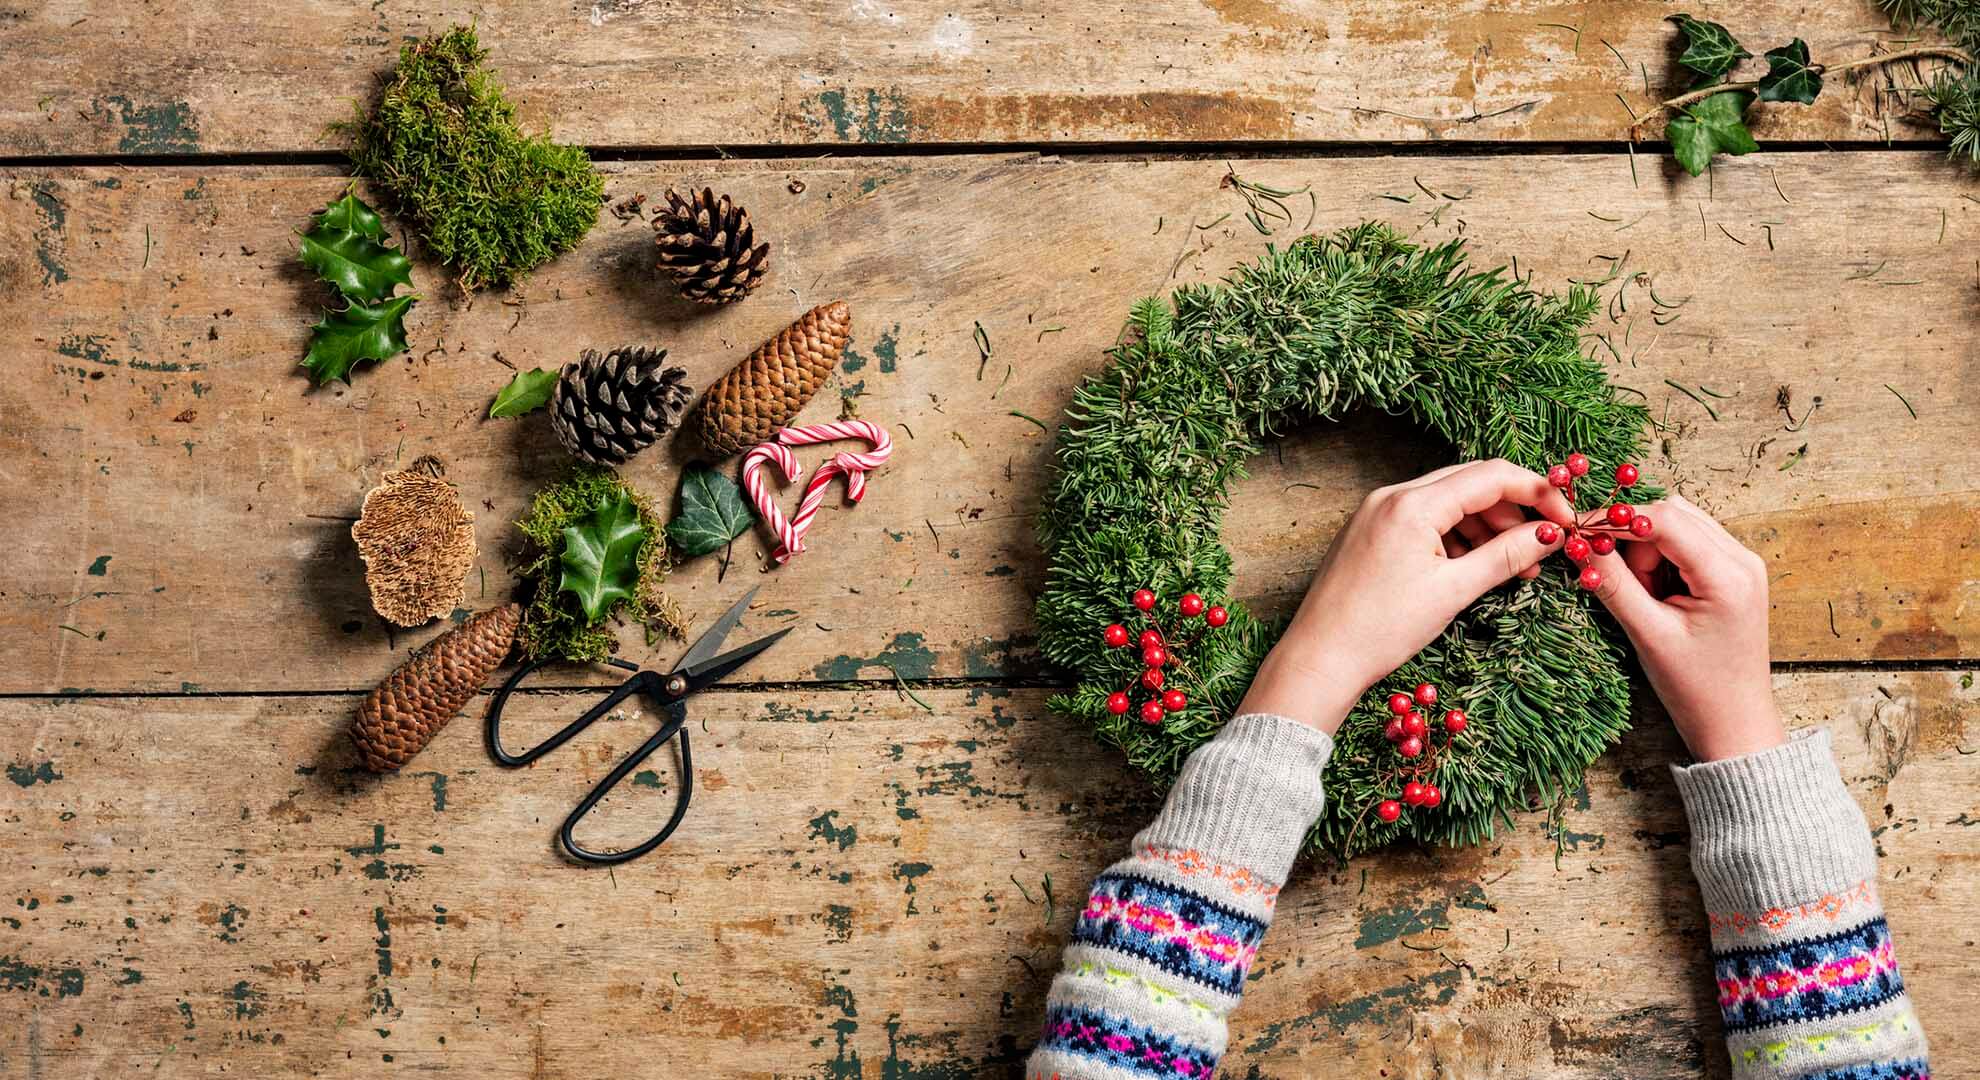 Making a Christmas wreath decoration with tree clippings, berries and pine cones